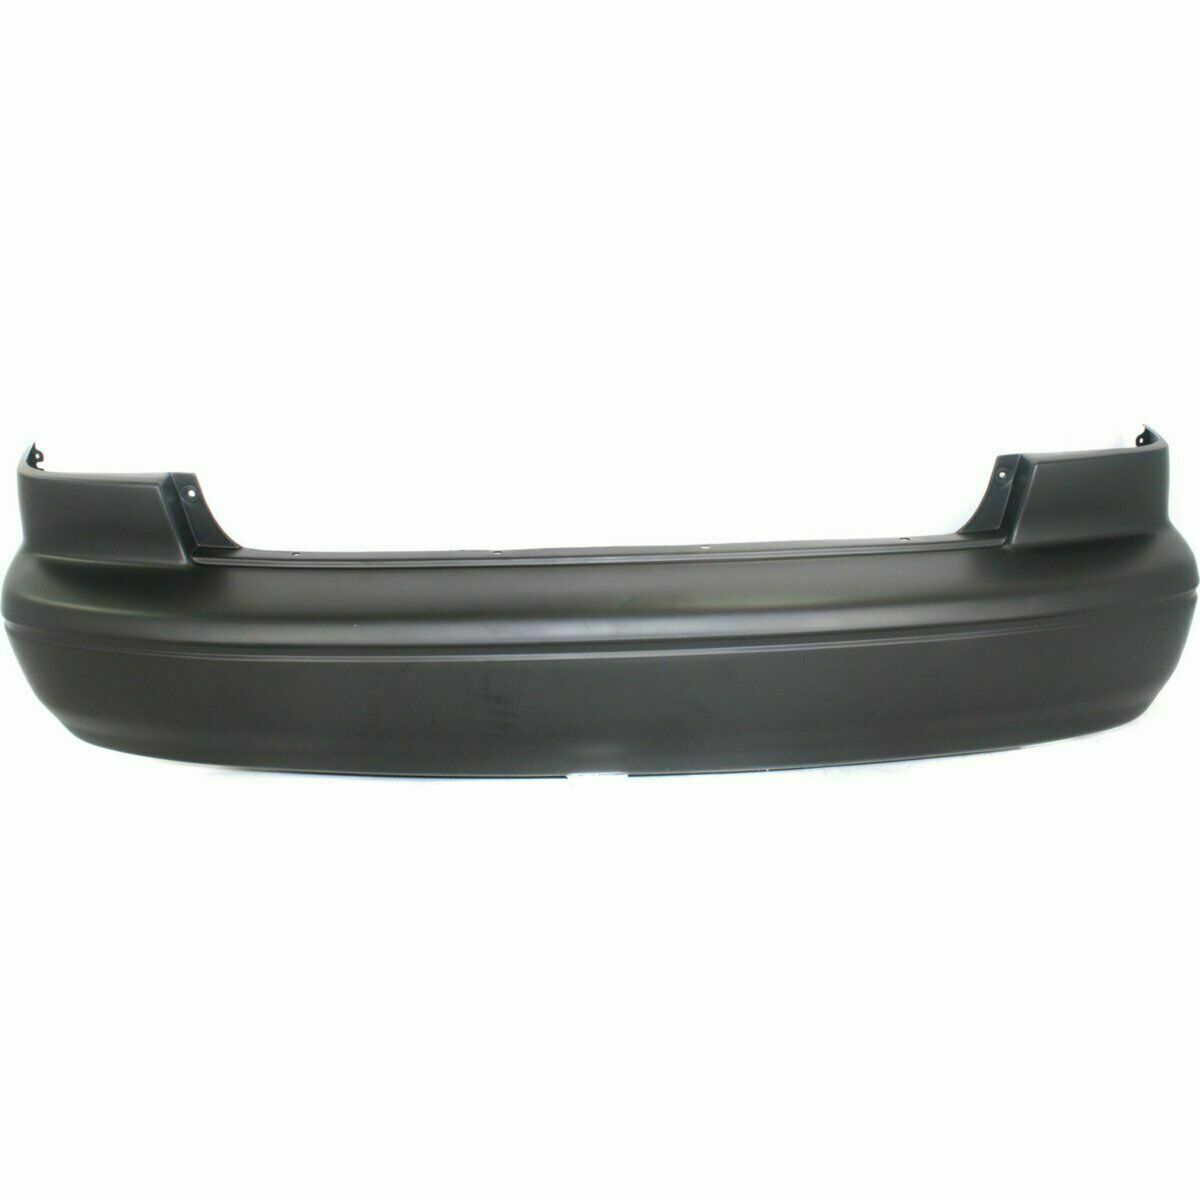 1997-1999 Toyota Camry Rear Bumper Painted to Match